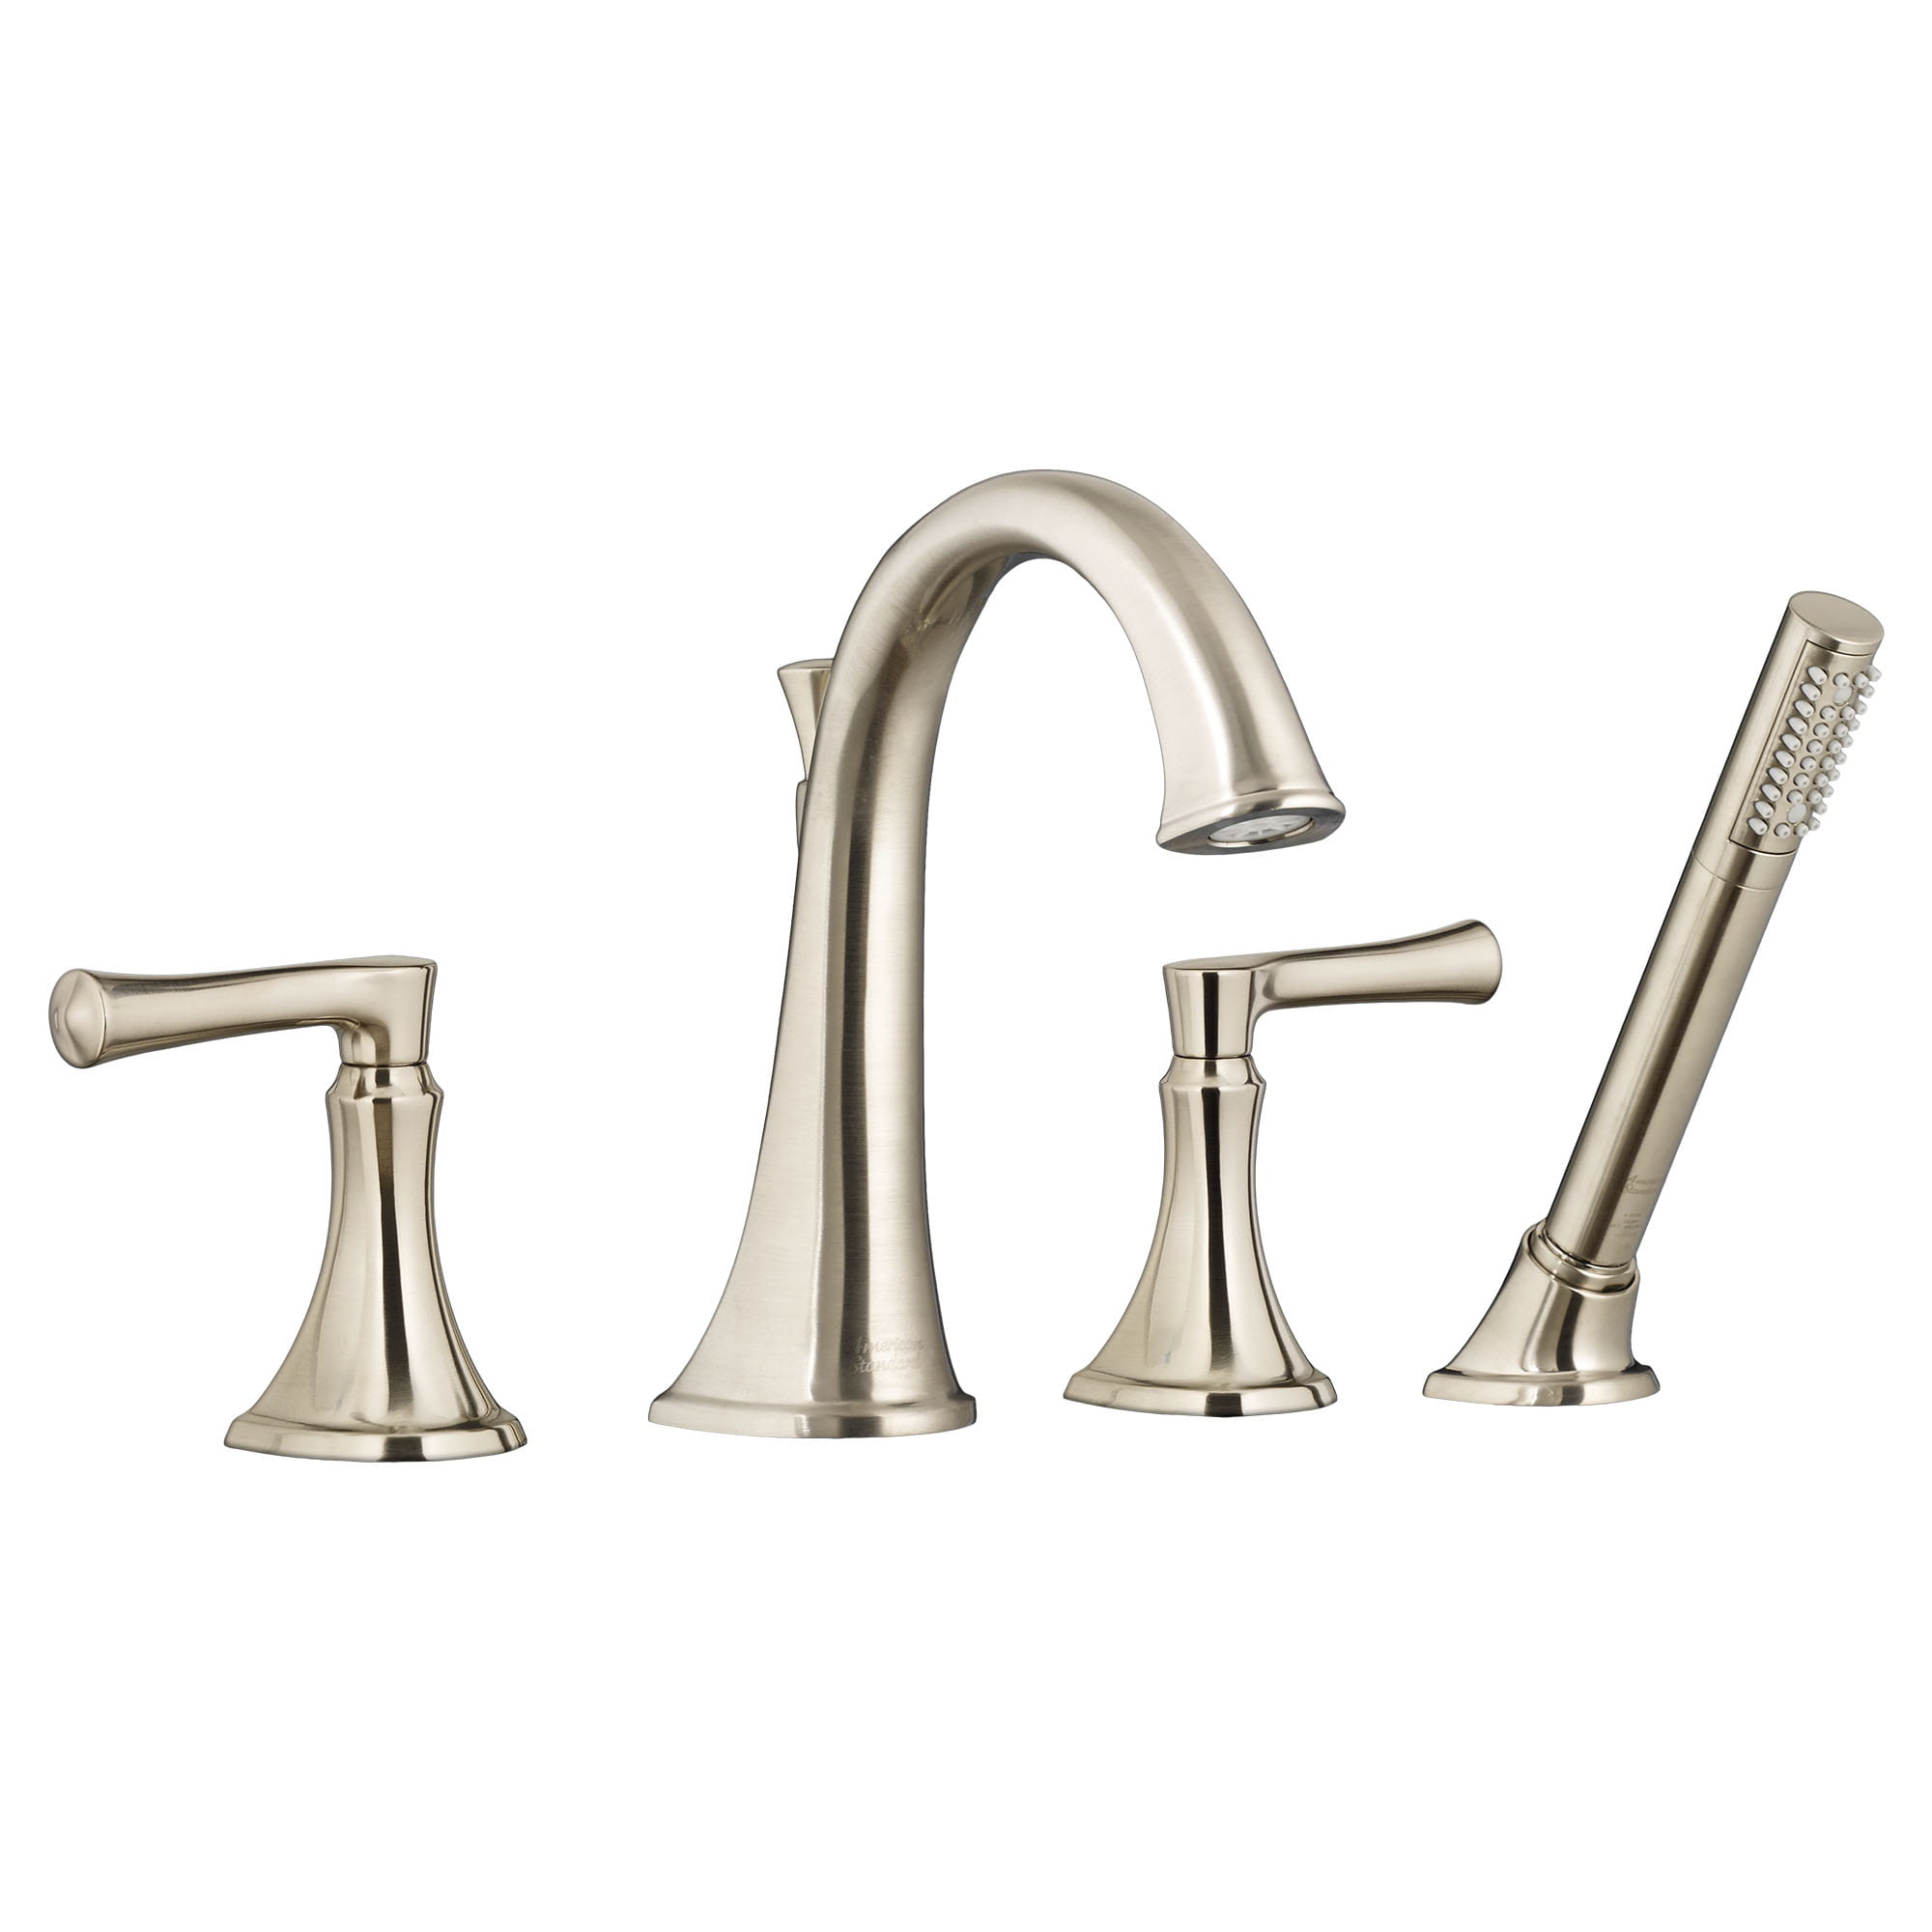 Estate Bathtub Faucet With Personal Shower for Flash Rough In Valve With Lever Handles   BRUSHED NICKEL